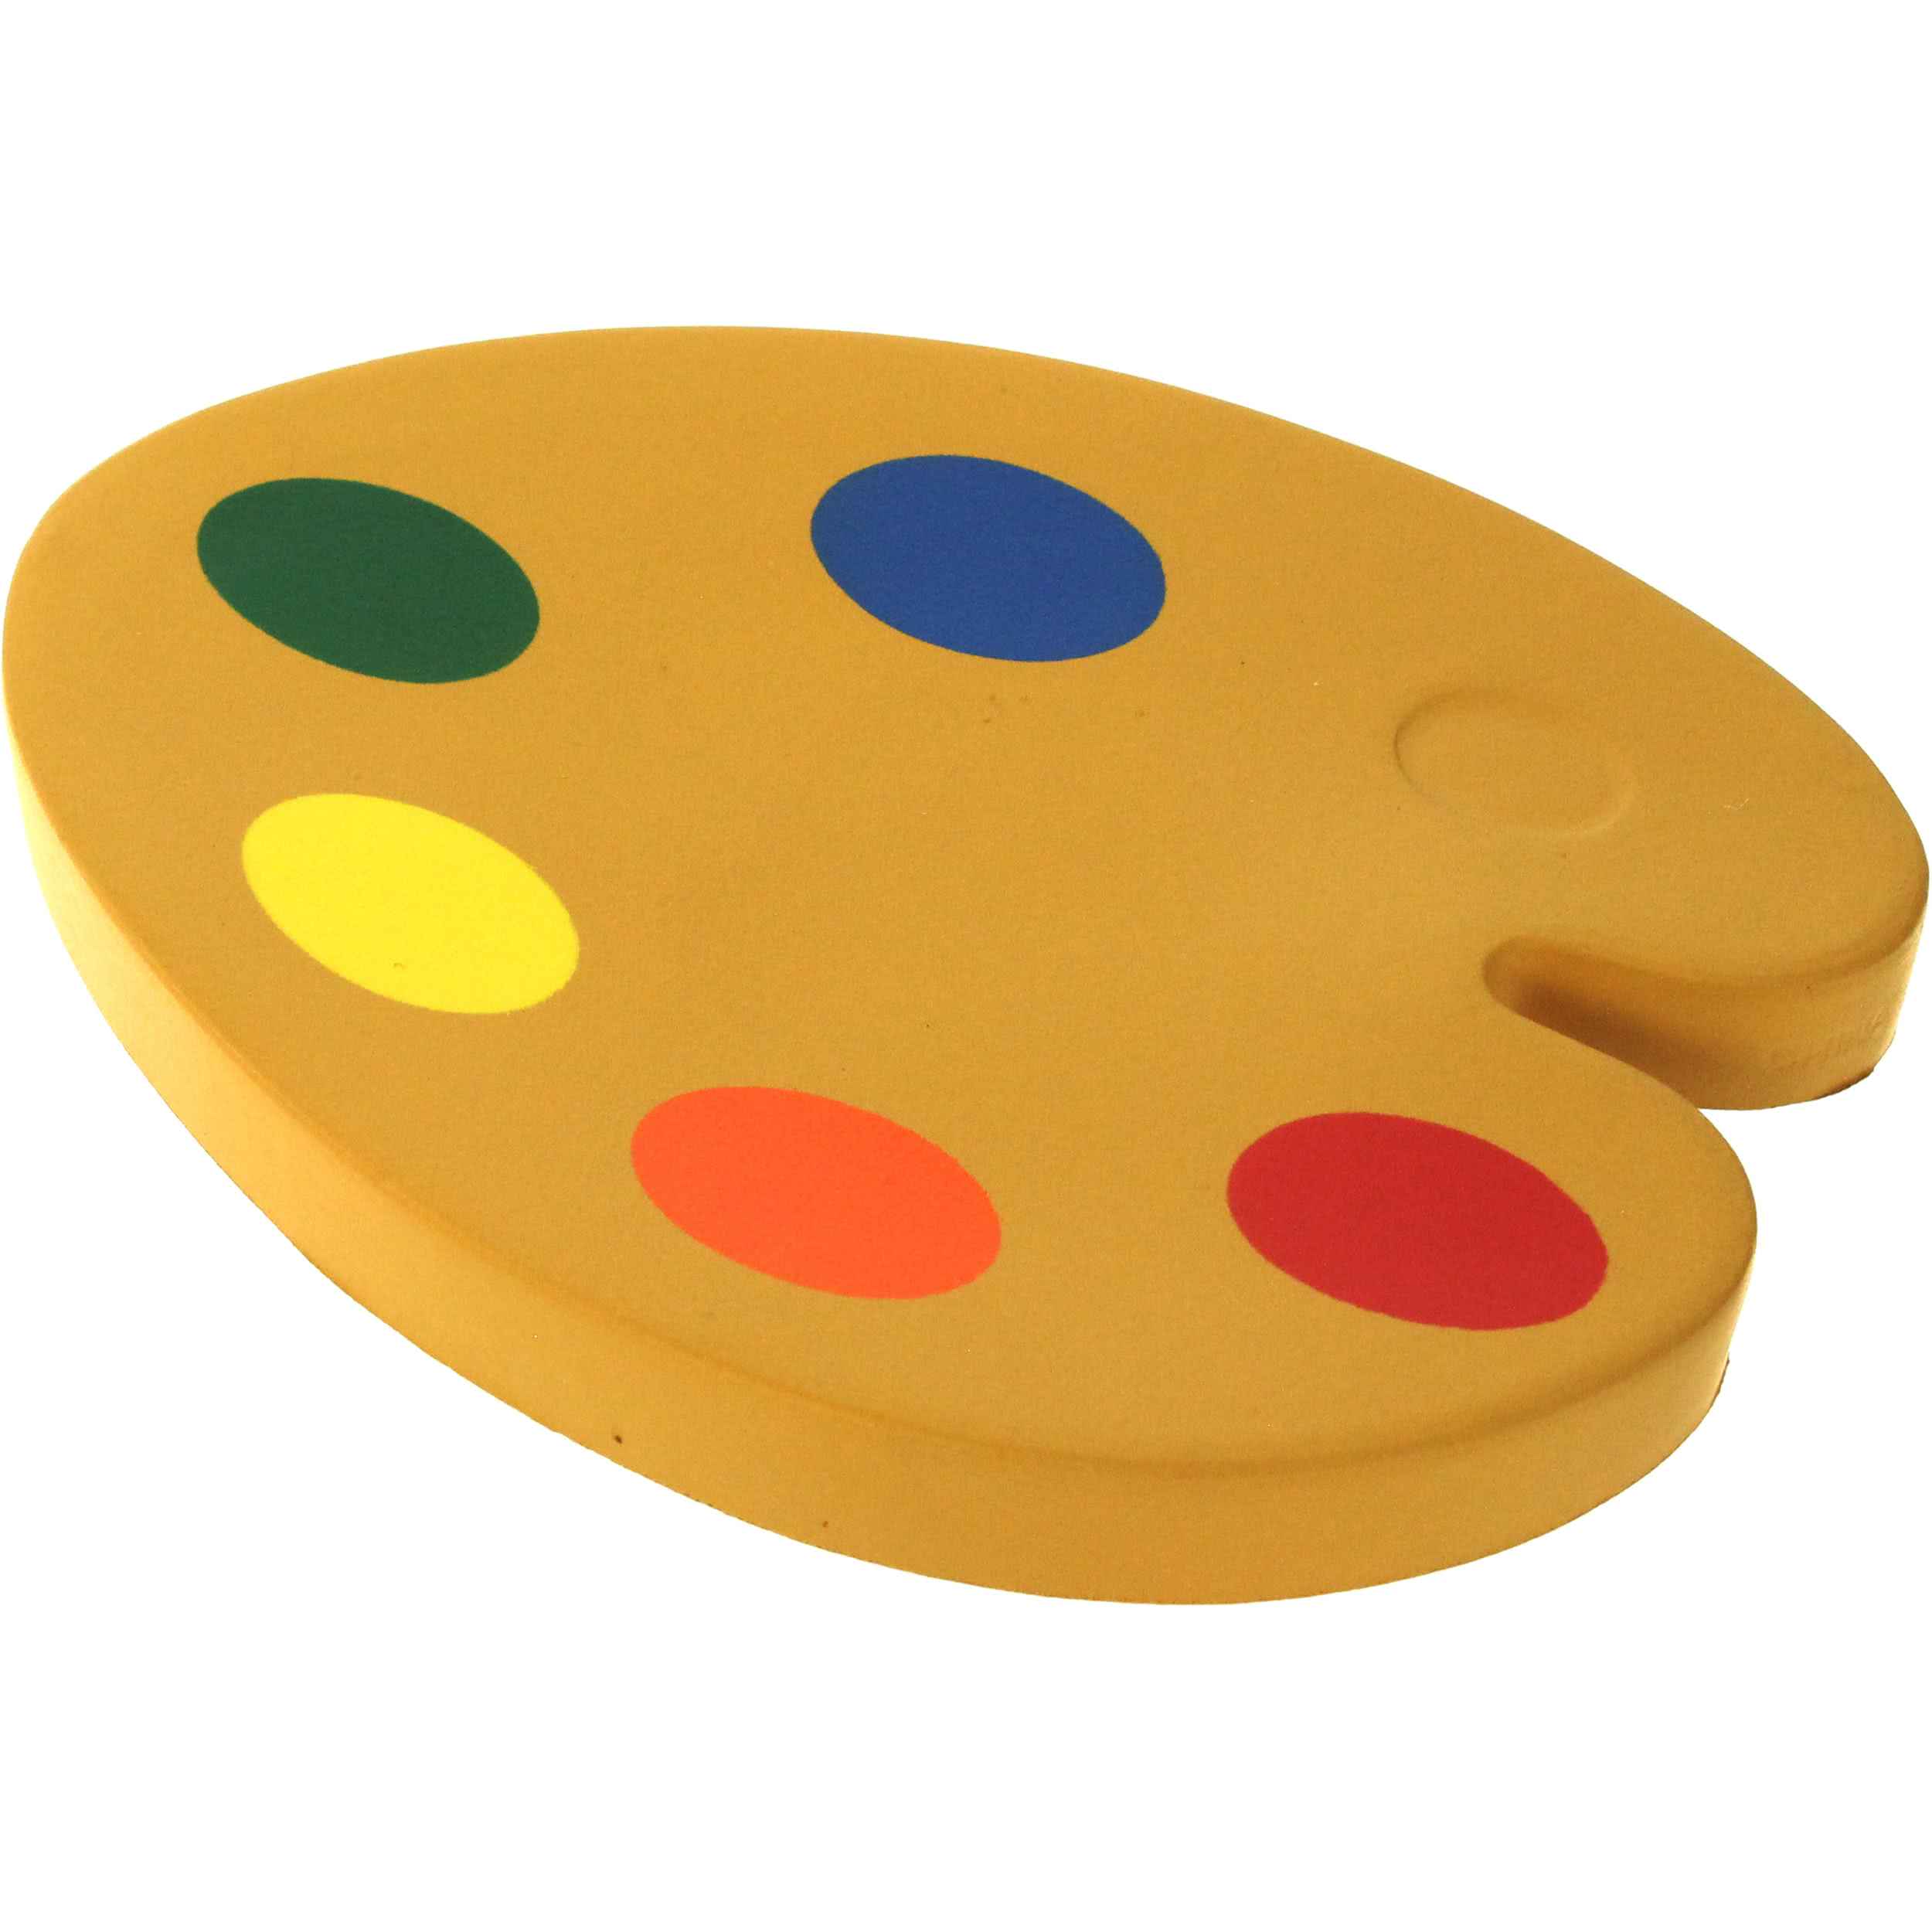 Promotional Paint Palette Stress Balls with Custom Logo for $1.16 Ea.